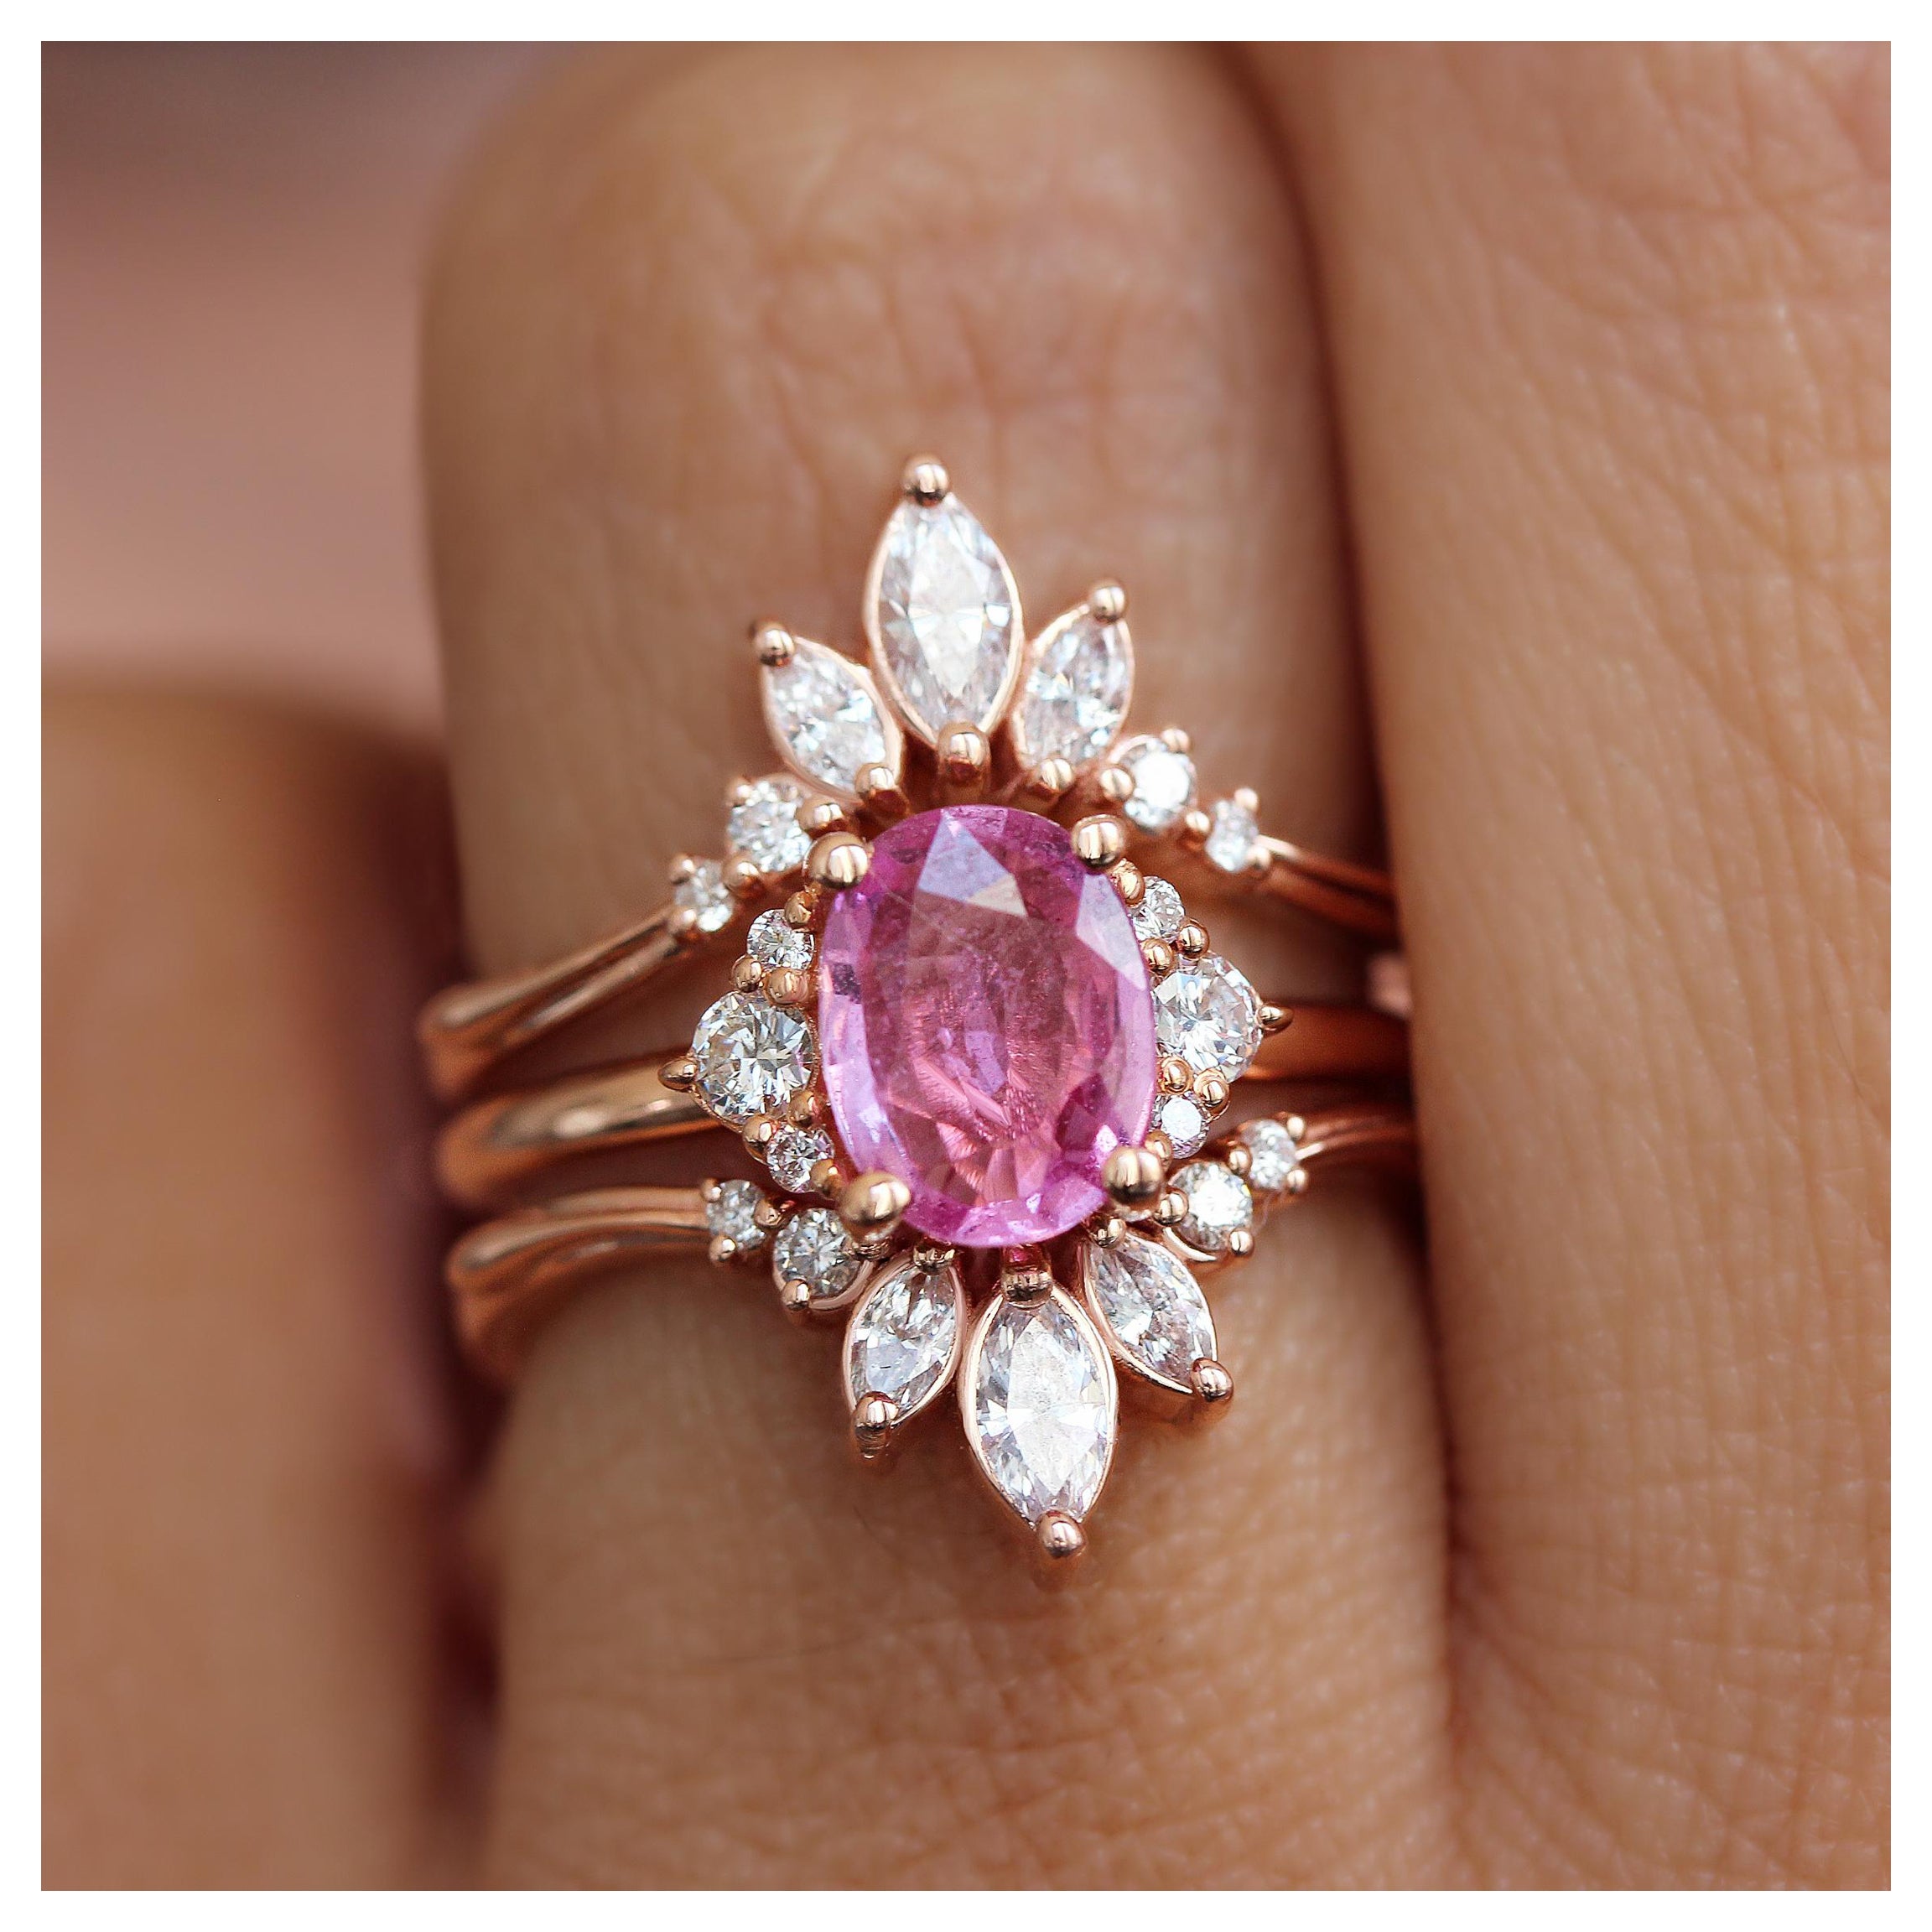 Vs Natural Pink Sapphire Solitaire Ring Solid 14K Yellow Gold Engagement Wedding Ring. Pink Diamond Alternative. Baby Pink Sapphire Jewelry